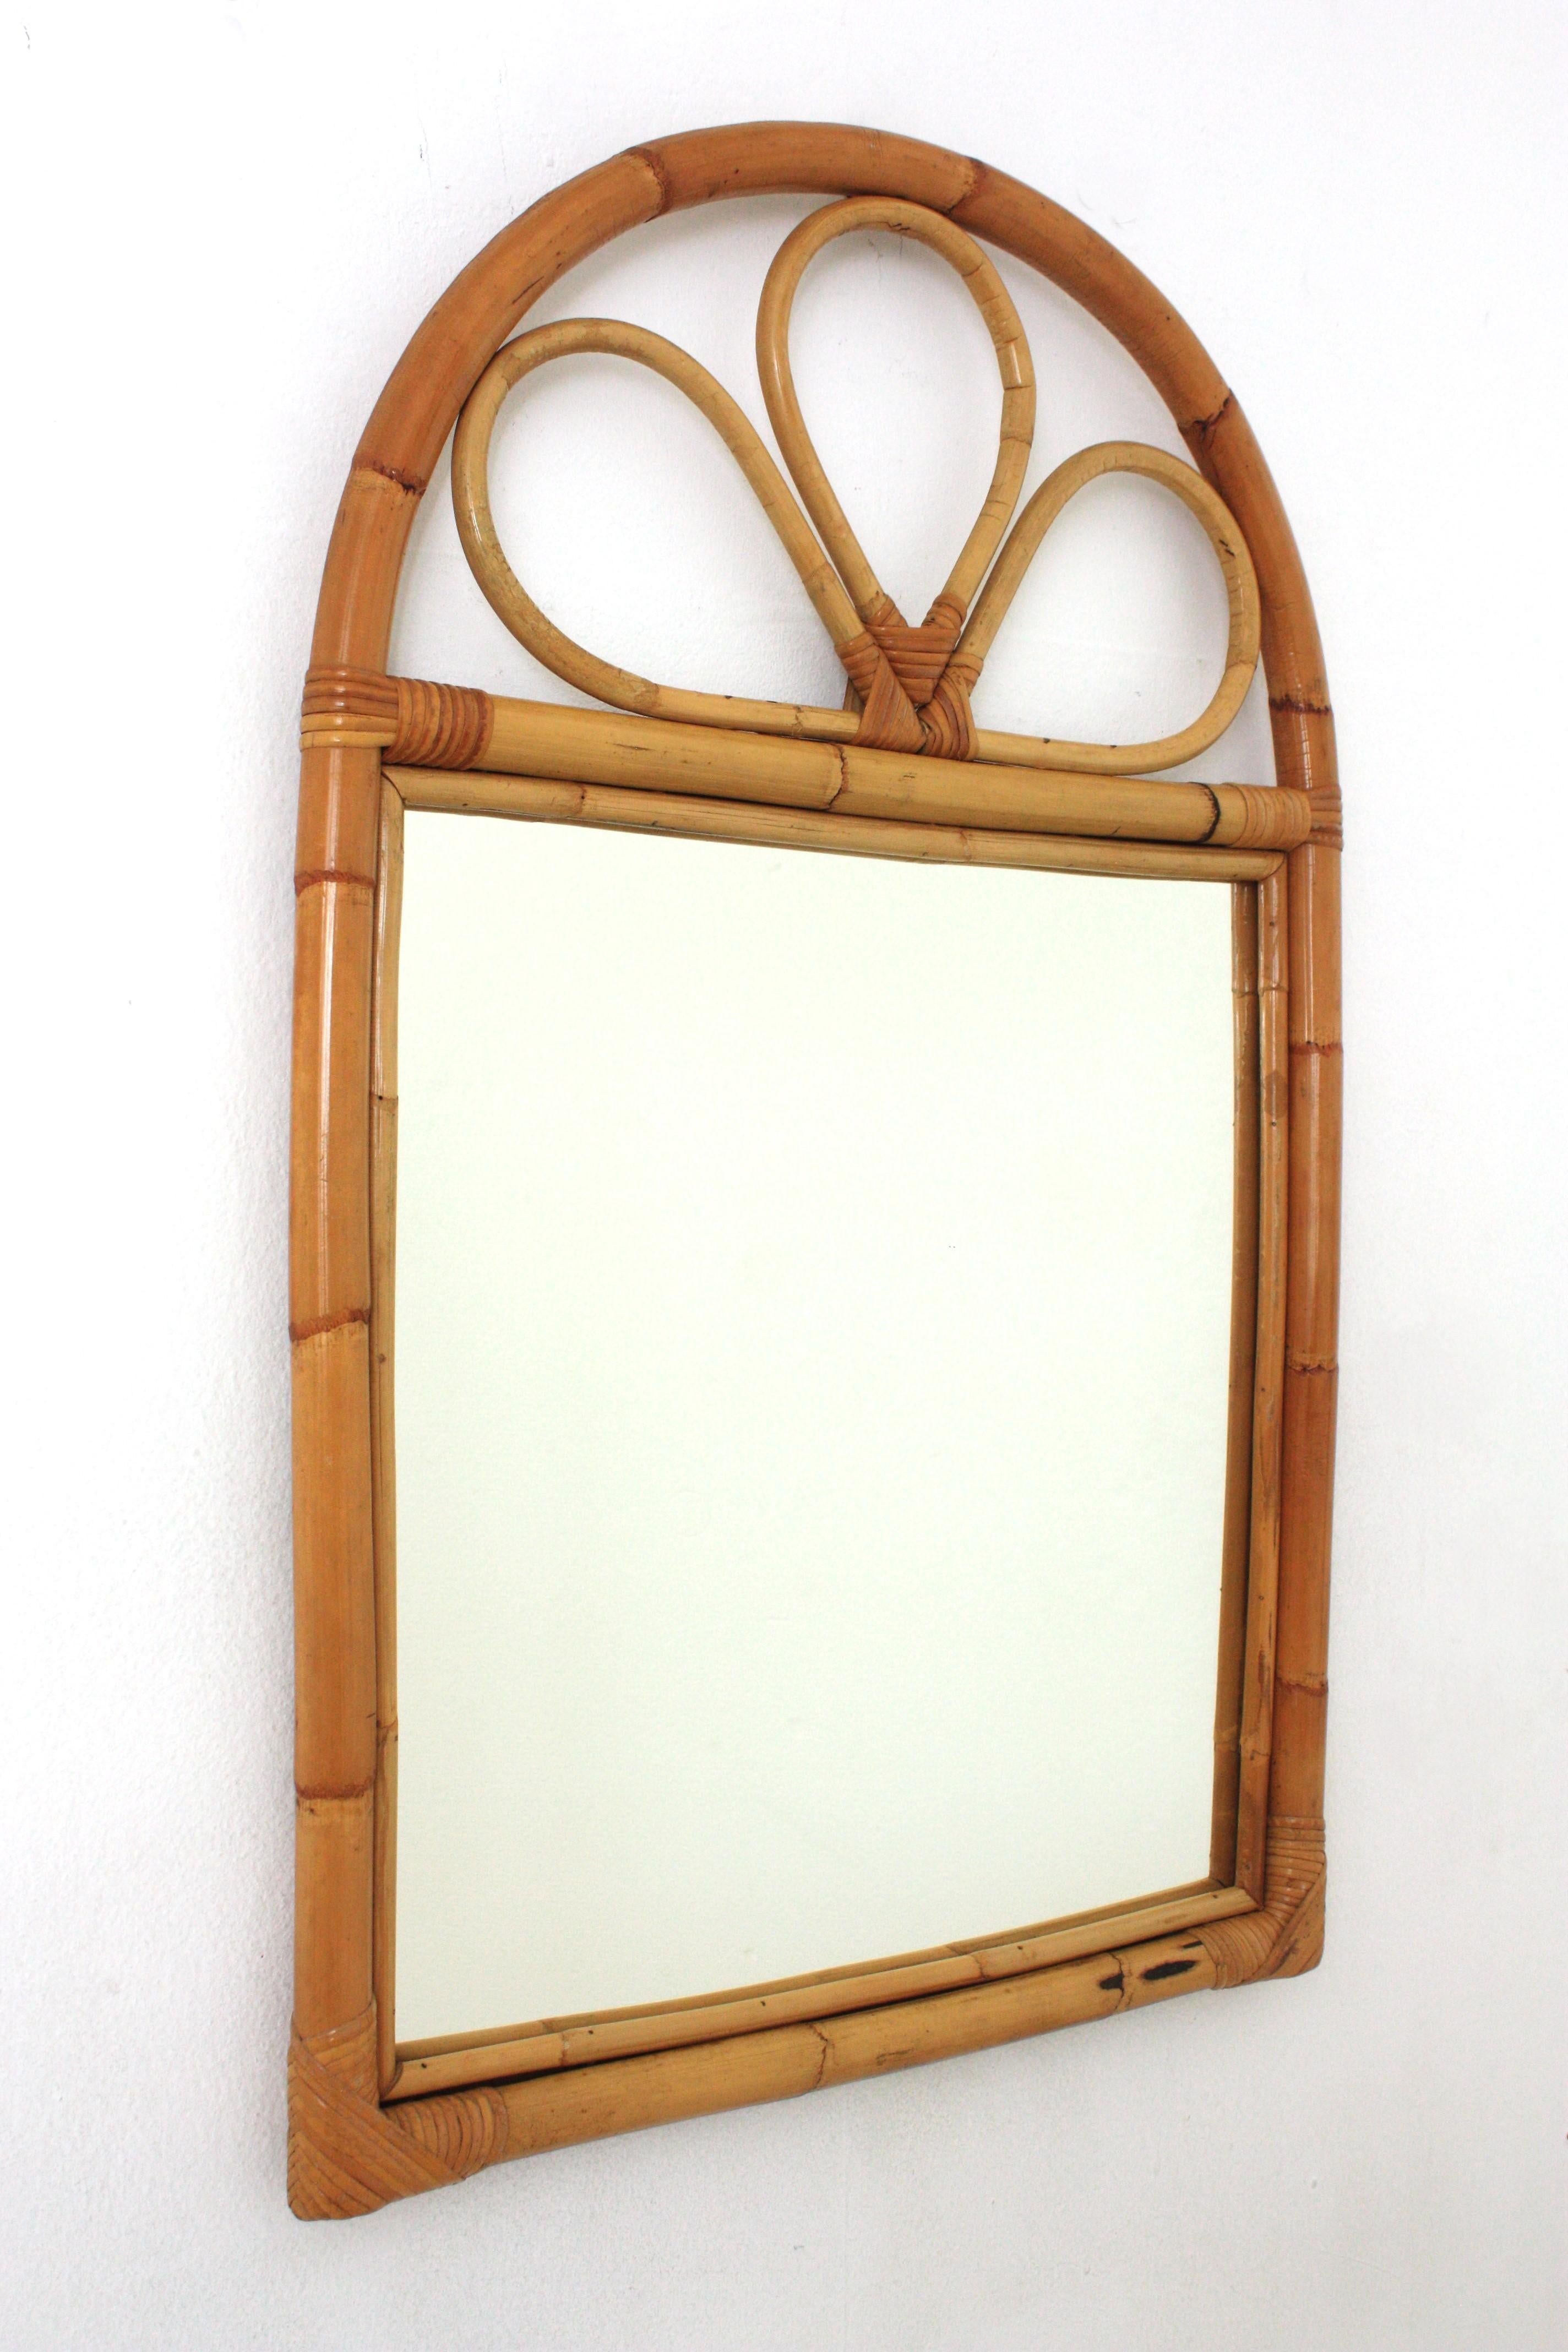 Mid-Century Modern Spanish Rattan Bamboo Mirror with Arched Top, 1960s For Sale